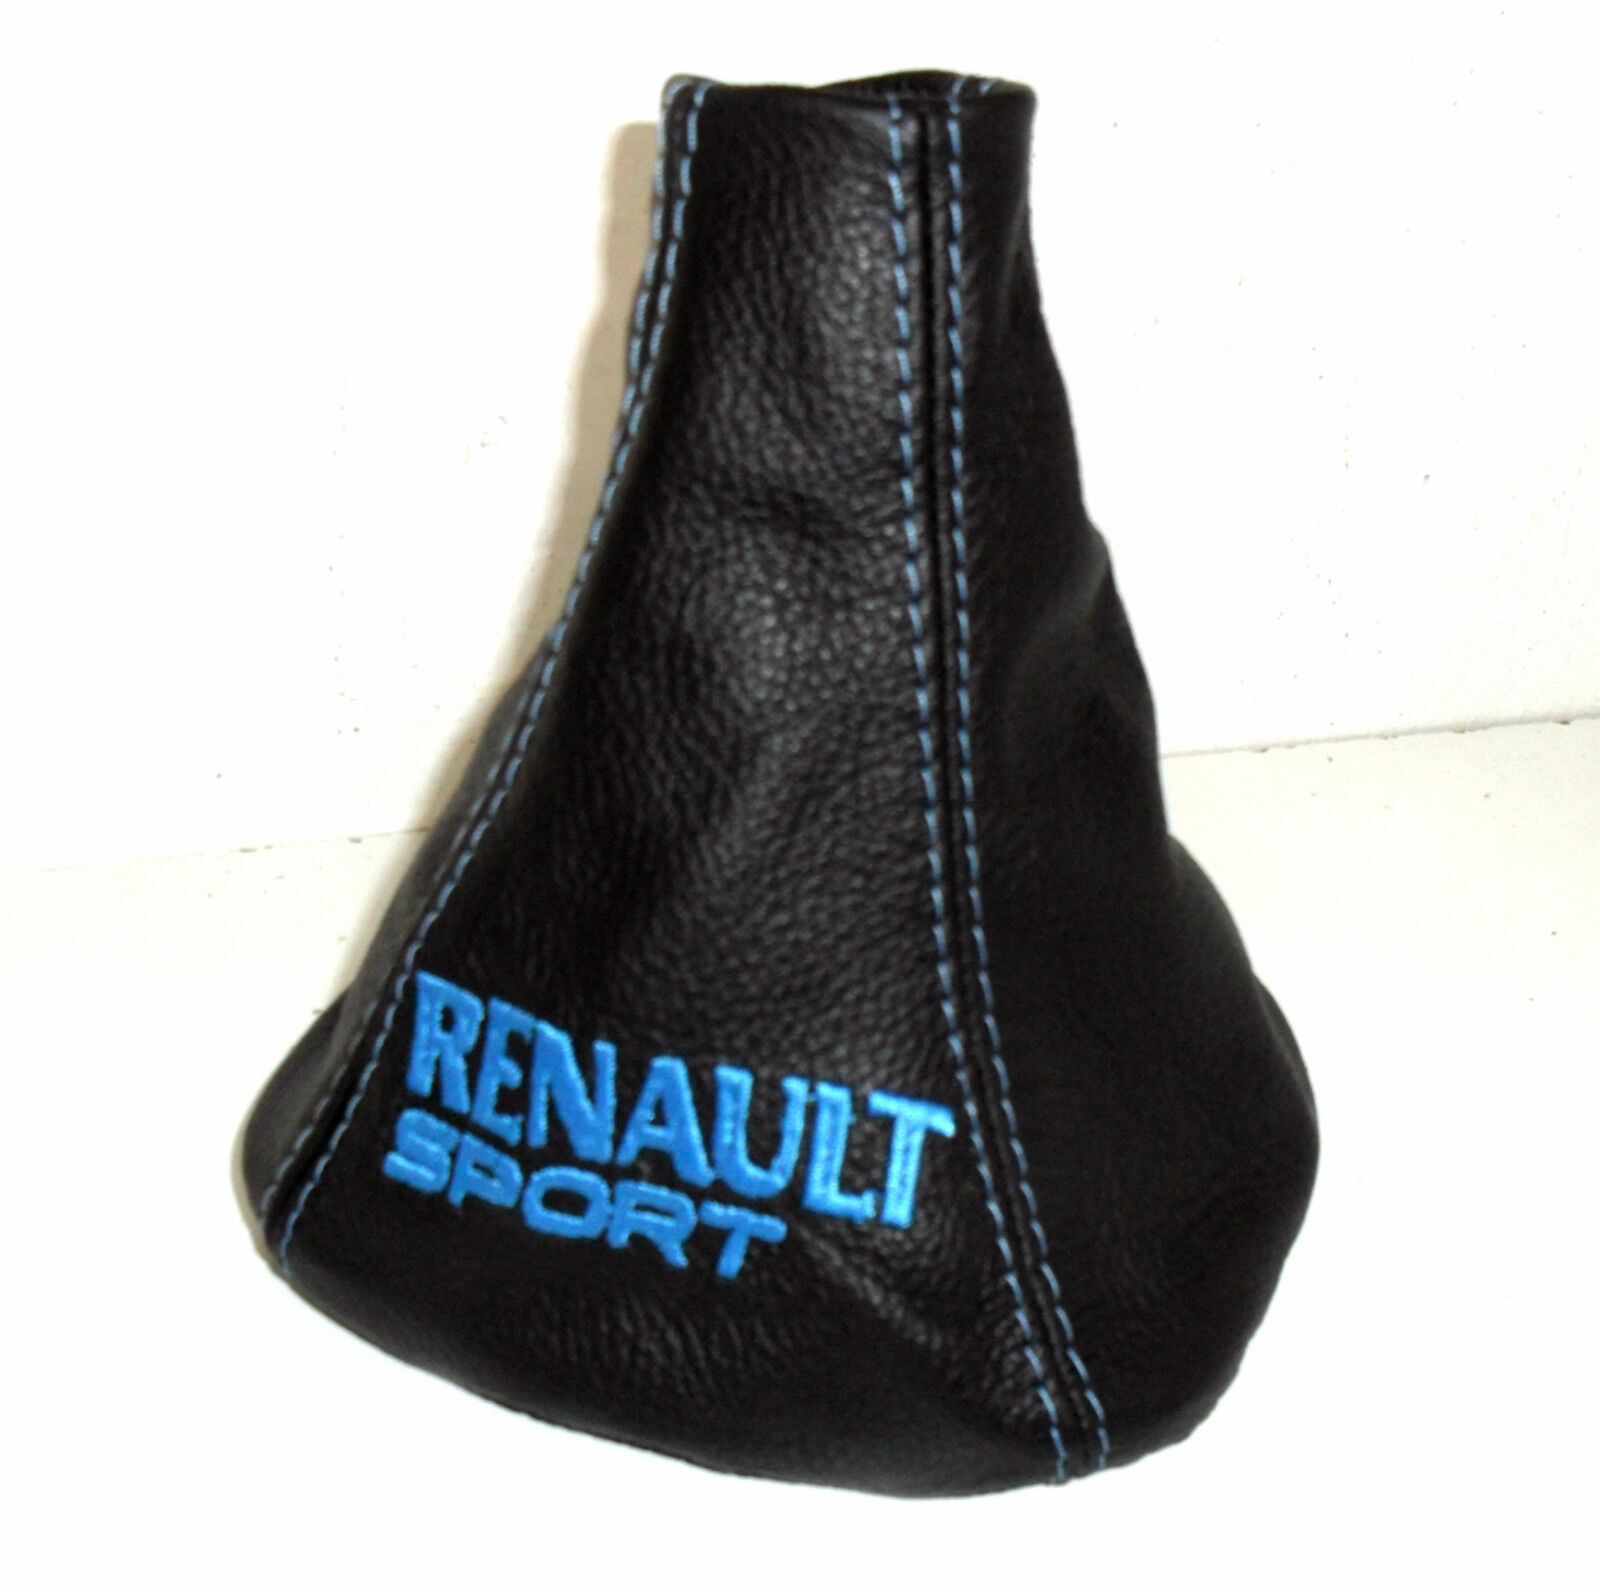 Renault Clio Shift Boot Black Genuine Leather + Embroidery Blue